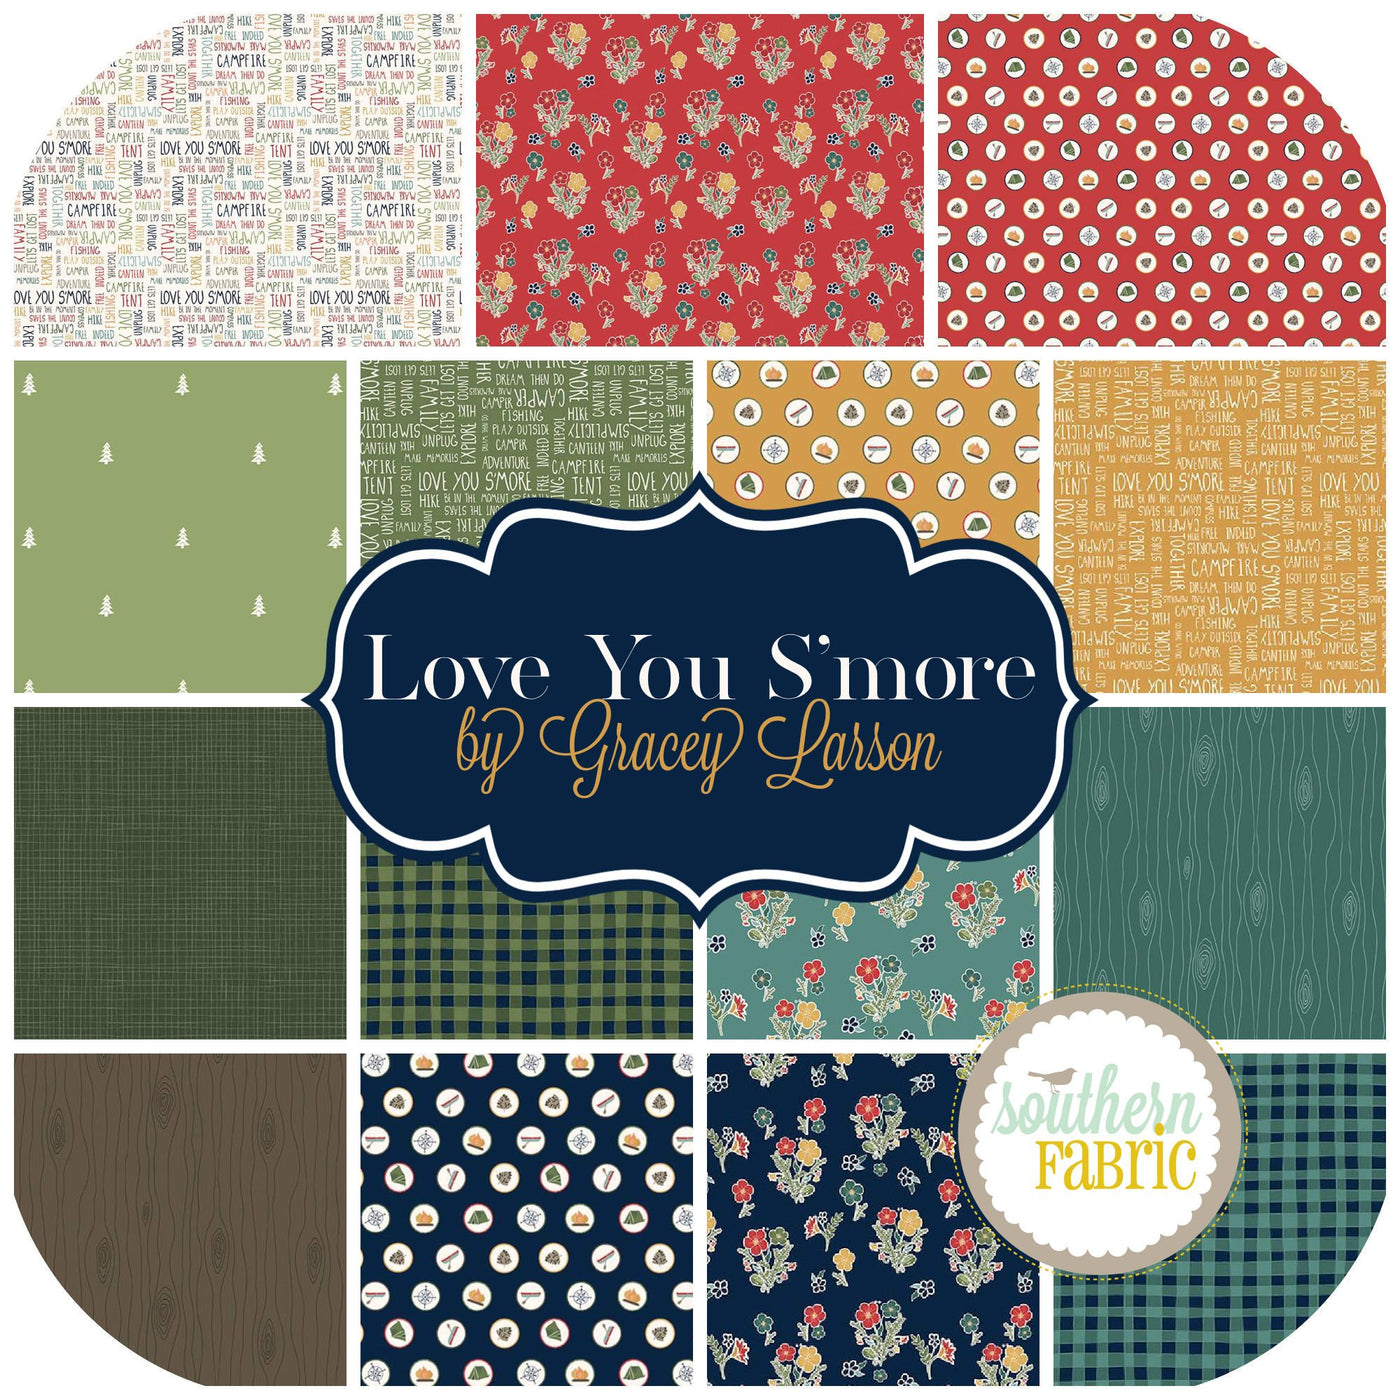 Love you S'more Fat Eighth Bundle (15 pcs) by Gracey Larson for Southern Fabric (GL.LYS.F8)